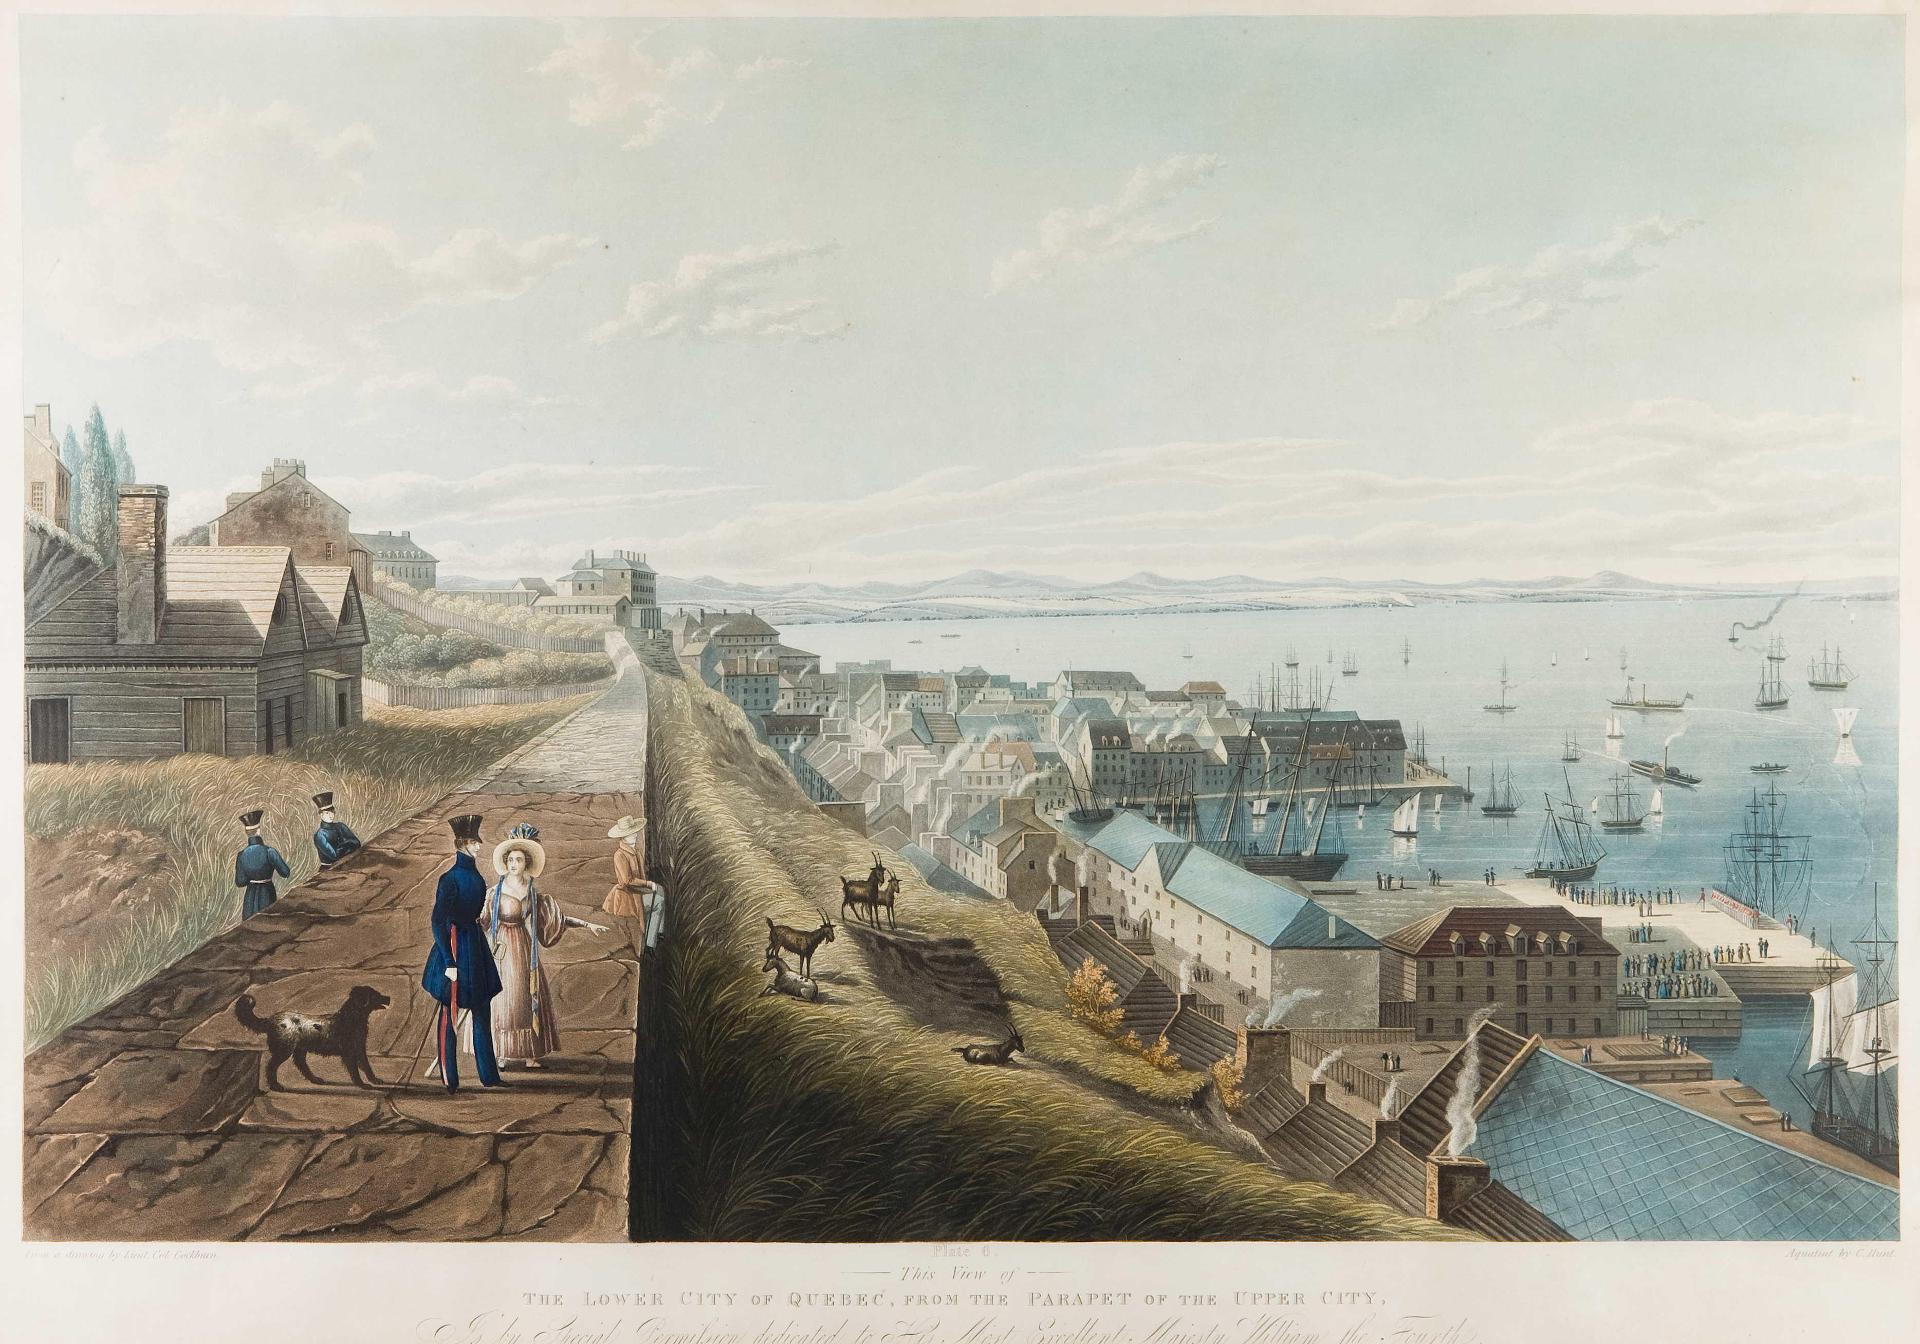 James Pattison Cockburn (1778-1847) - The Lower City of Québec from The Parapet of the Upper City. Plate 6 by C. Hunt published by Ackermann & Co., London 1833